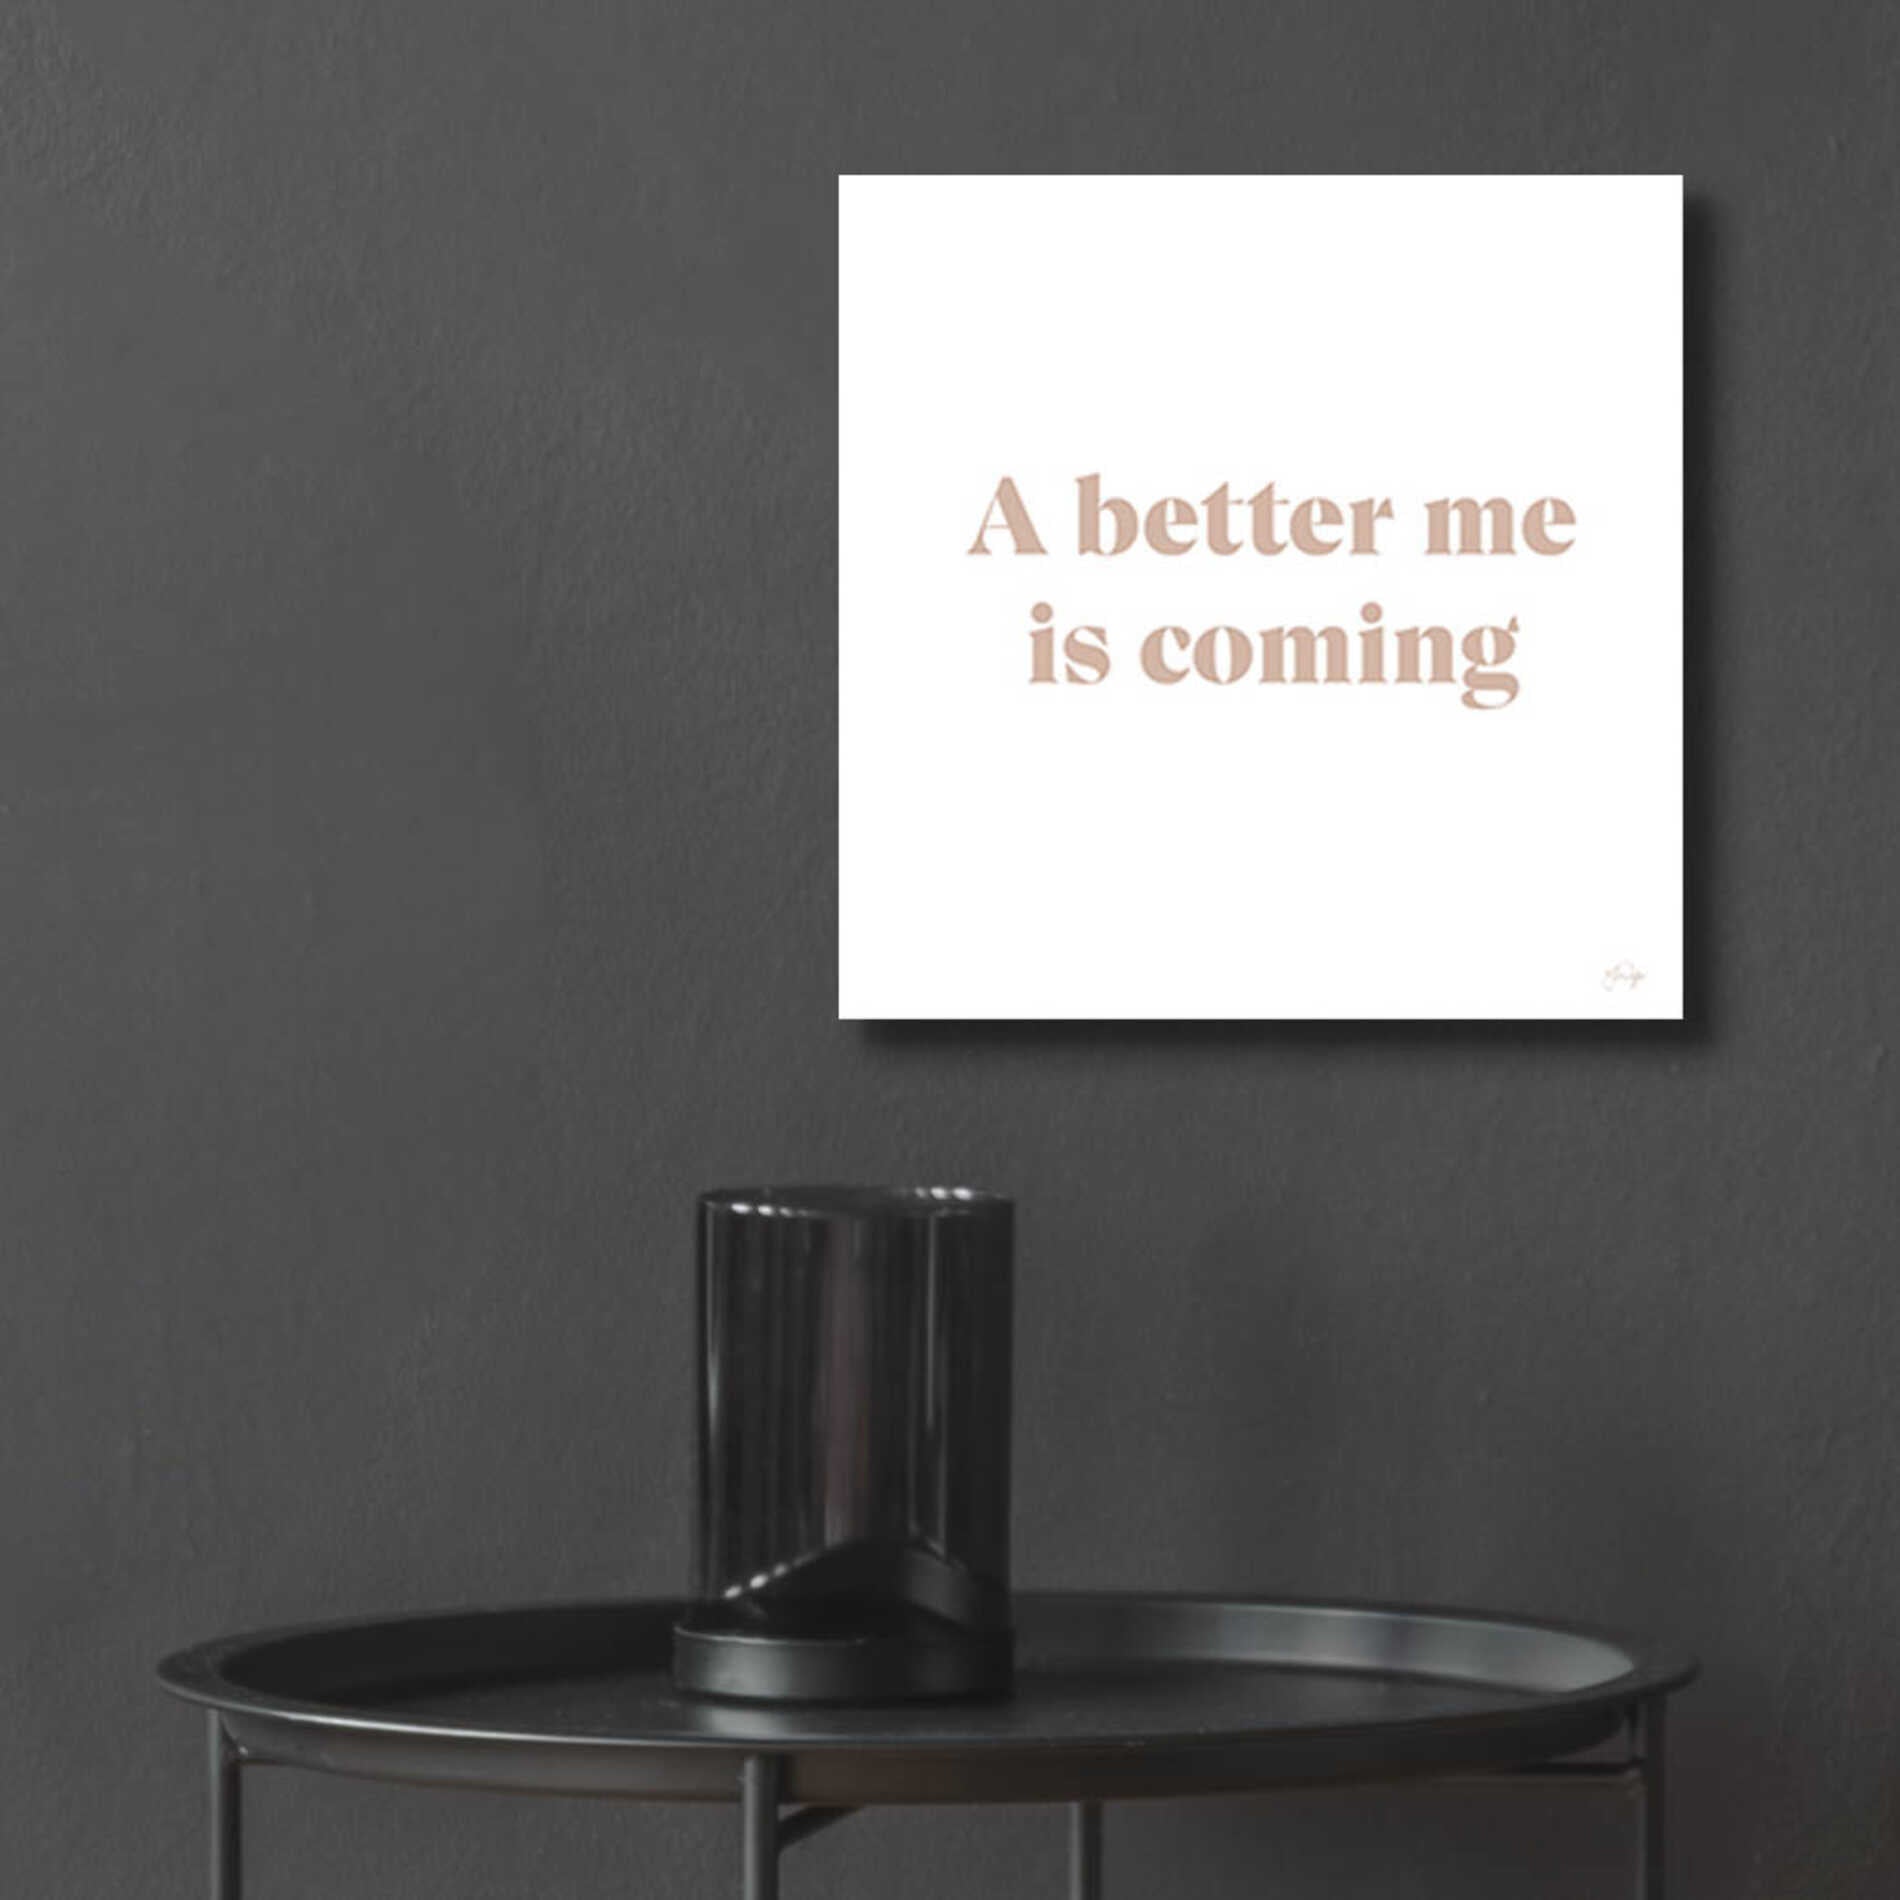 Epic Art 'A Better Me is Coming' by Yass Naffas Designs, Acrylic Glass Wall Art,12x12